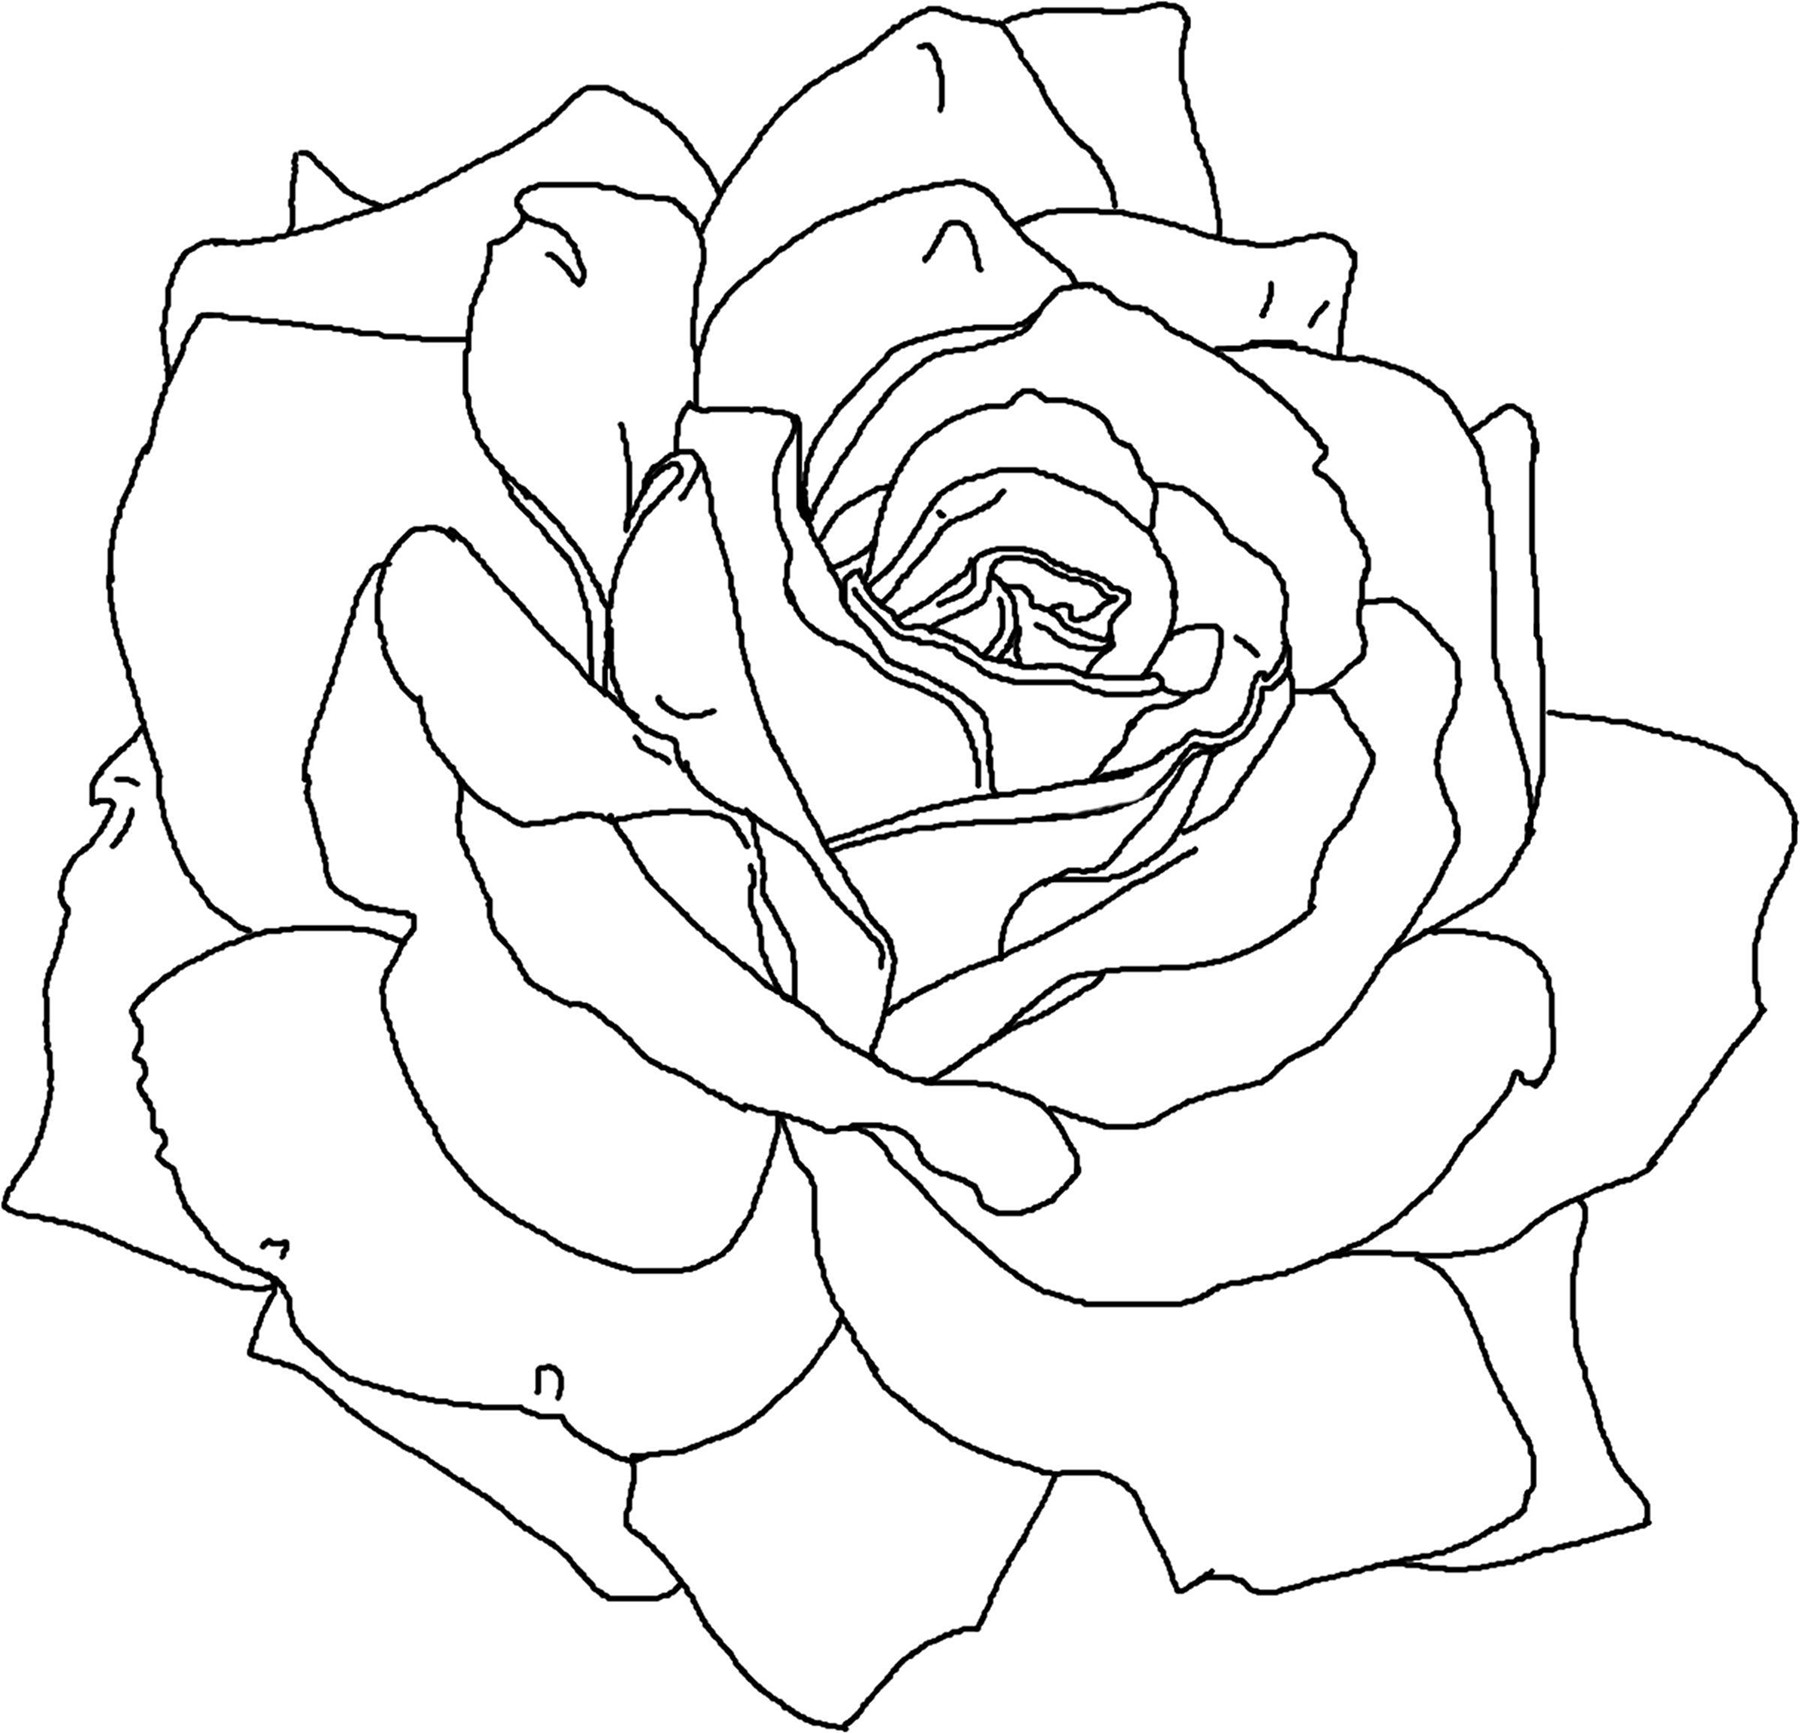 Coloring Pages Of Roses
 Free Printable Flower Coloring Pages For Kids Best